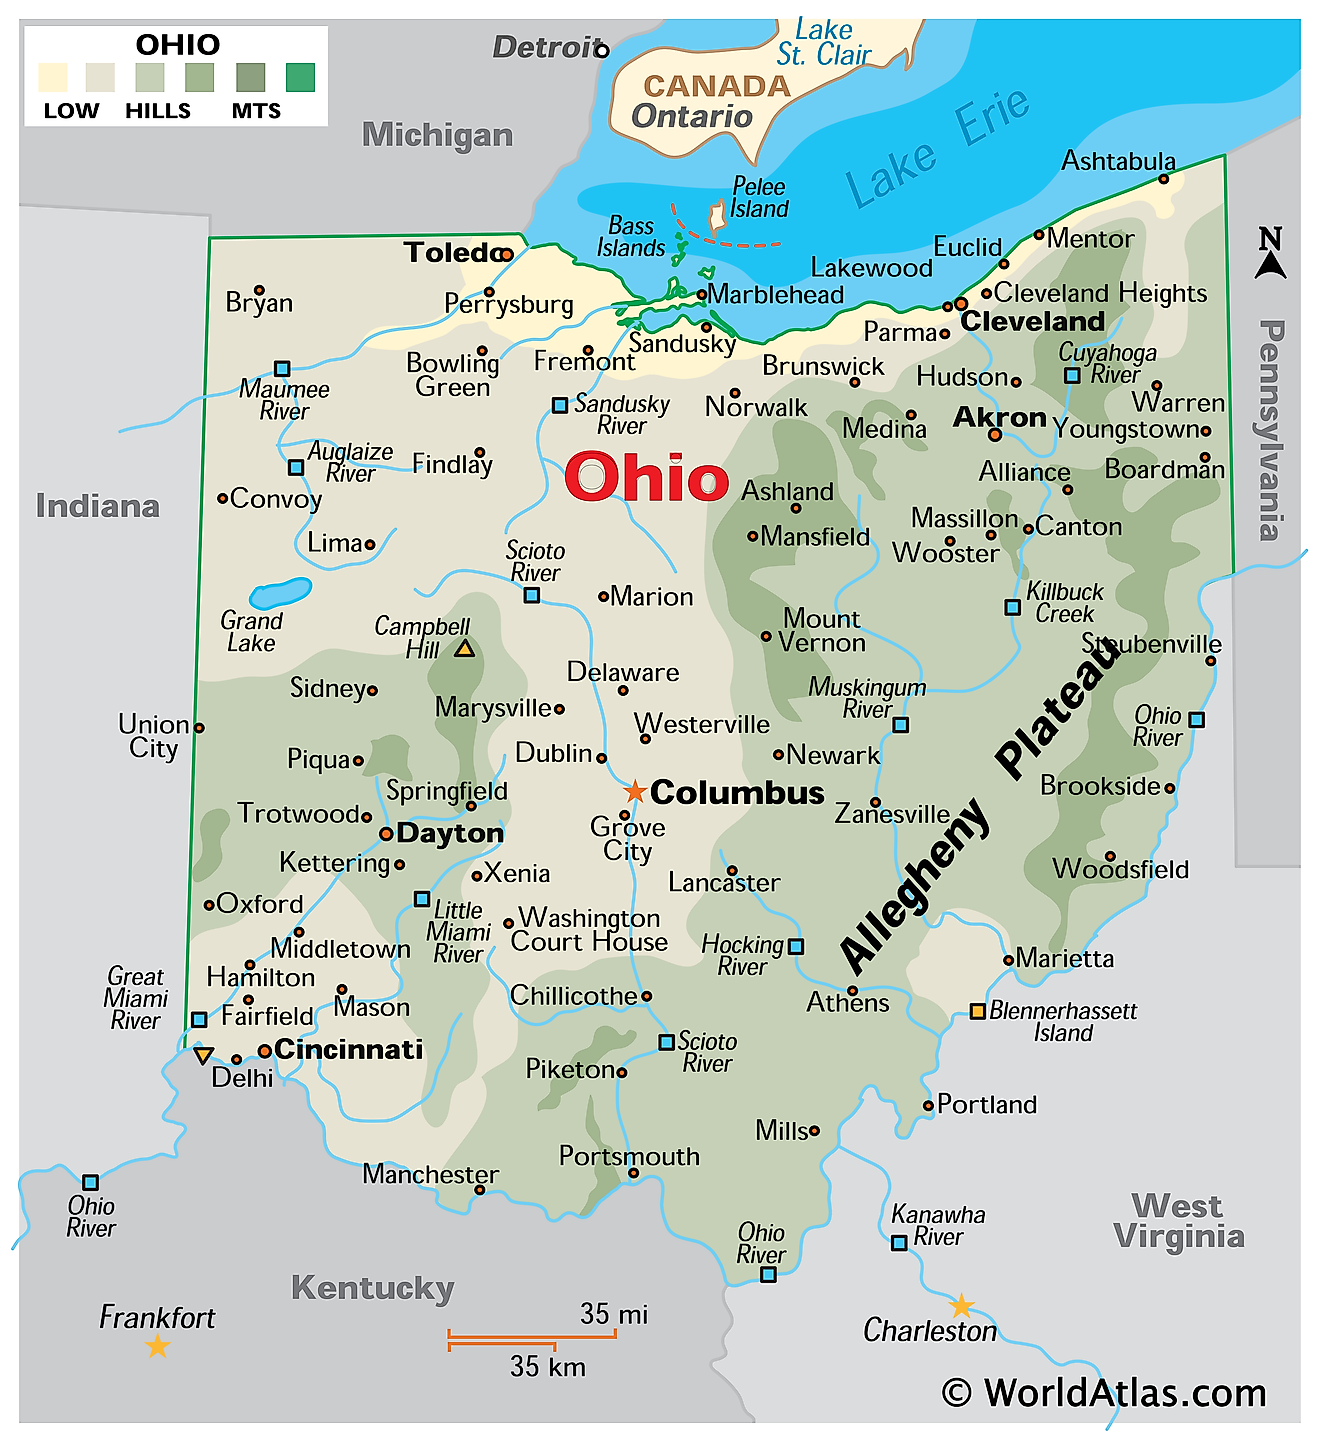 Geographical Map Of Ohio And Ohio Geographical Maps - Gambaran